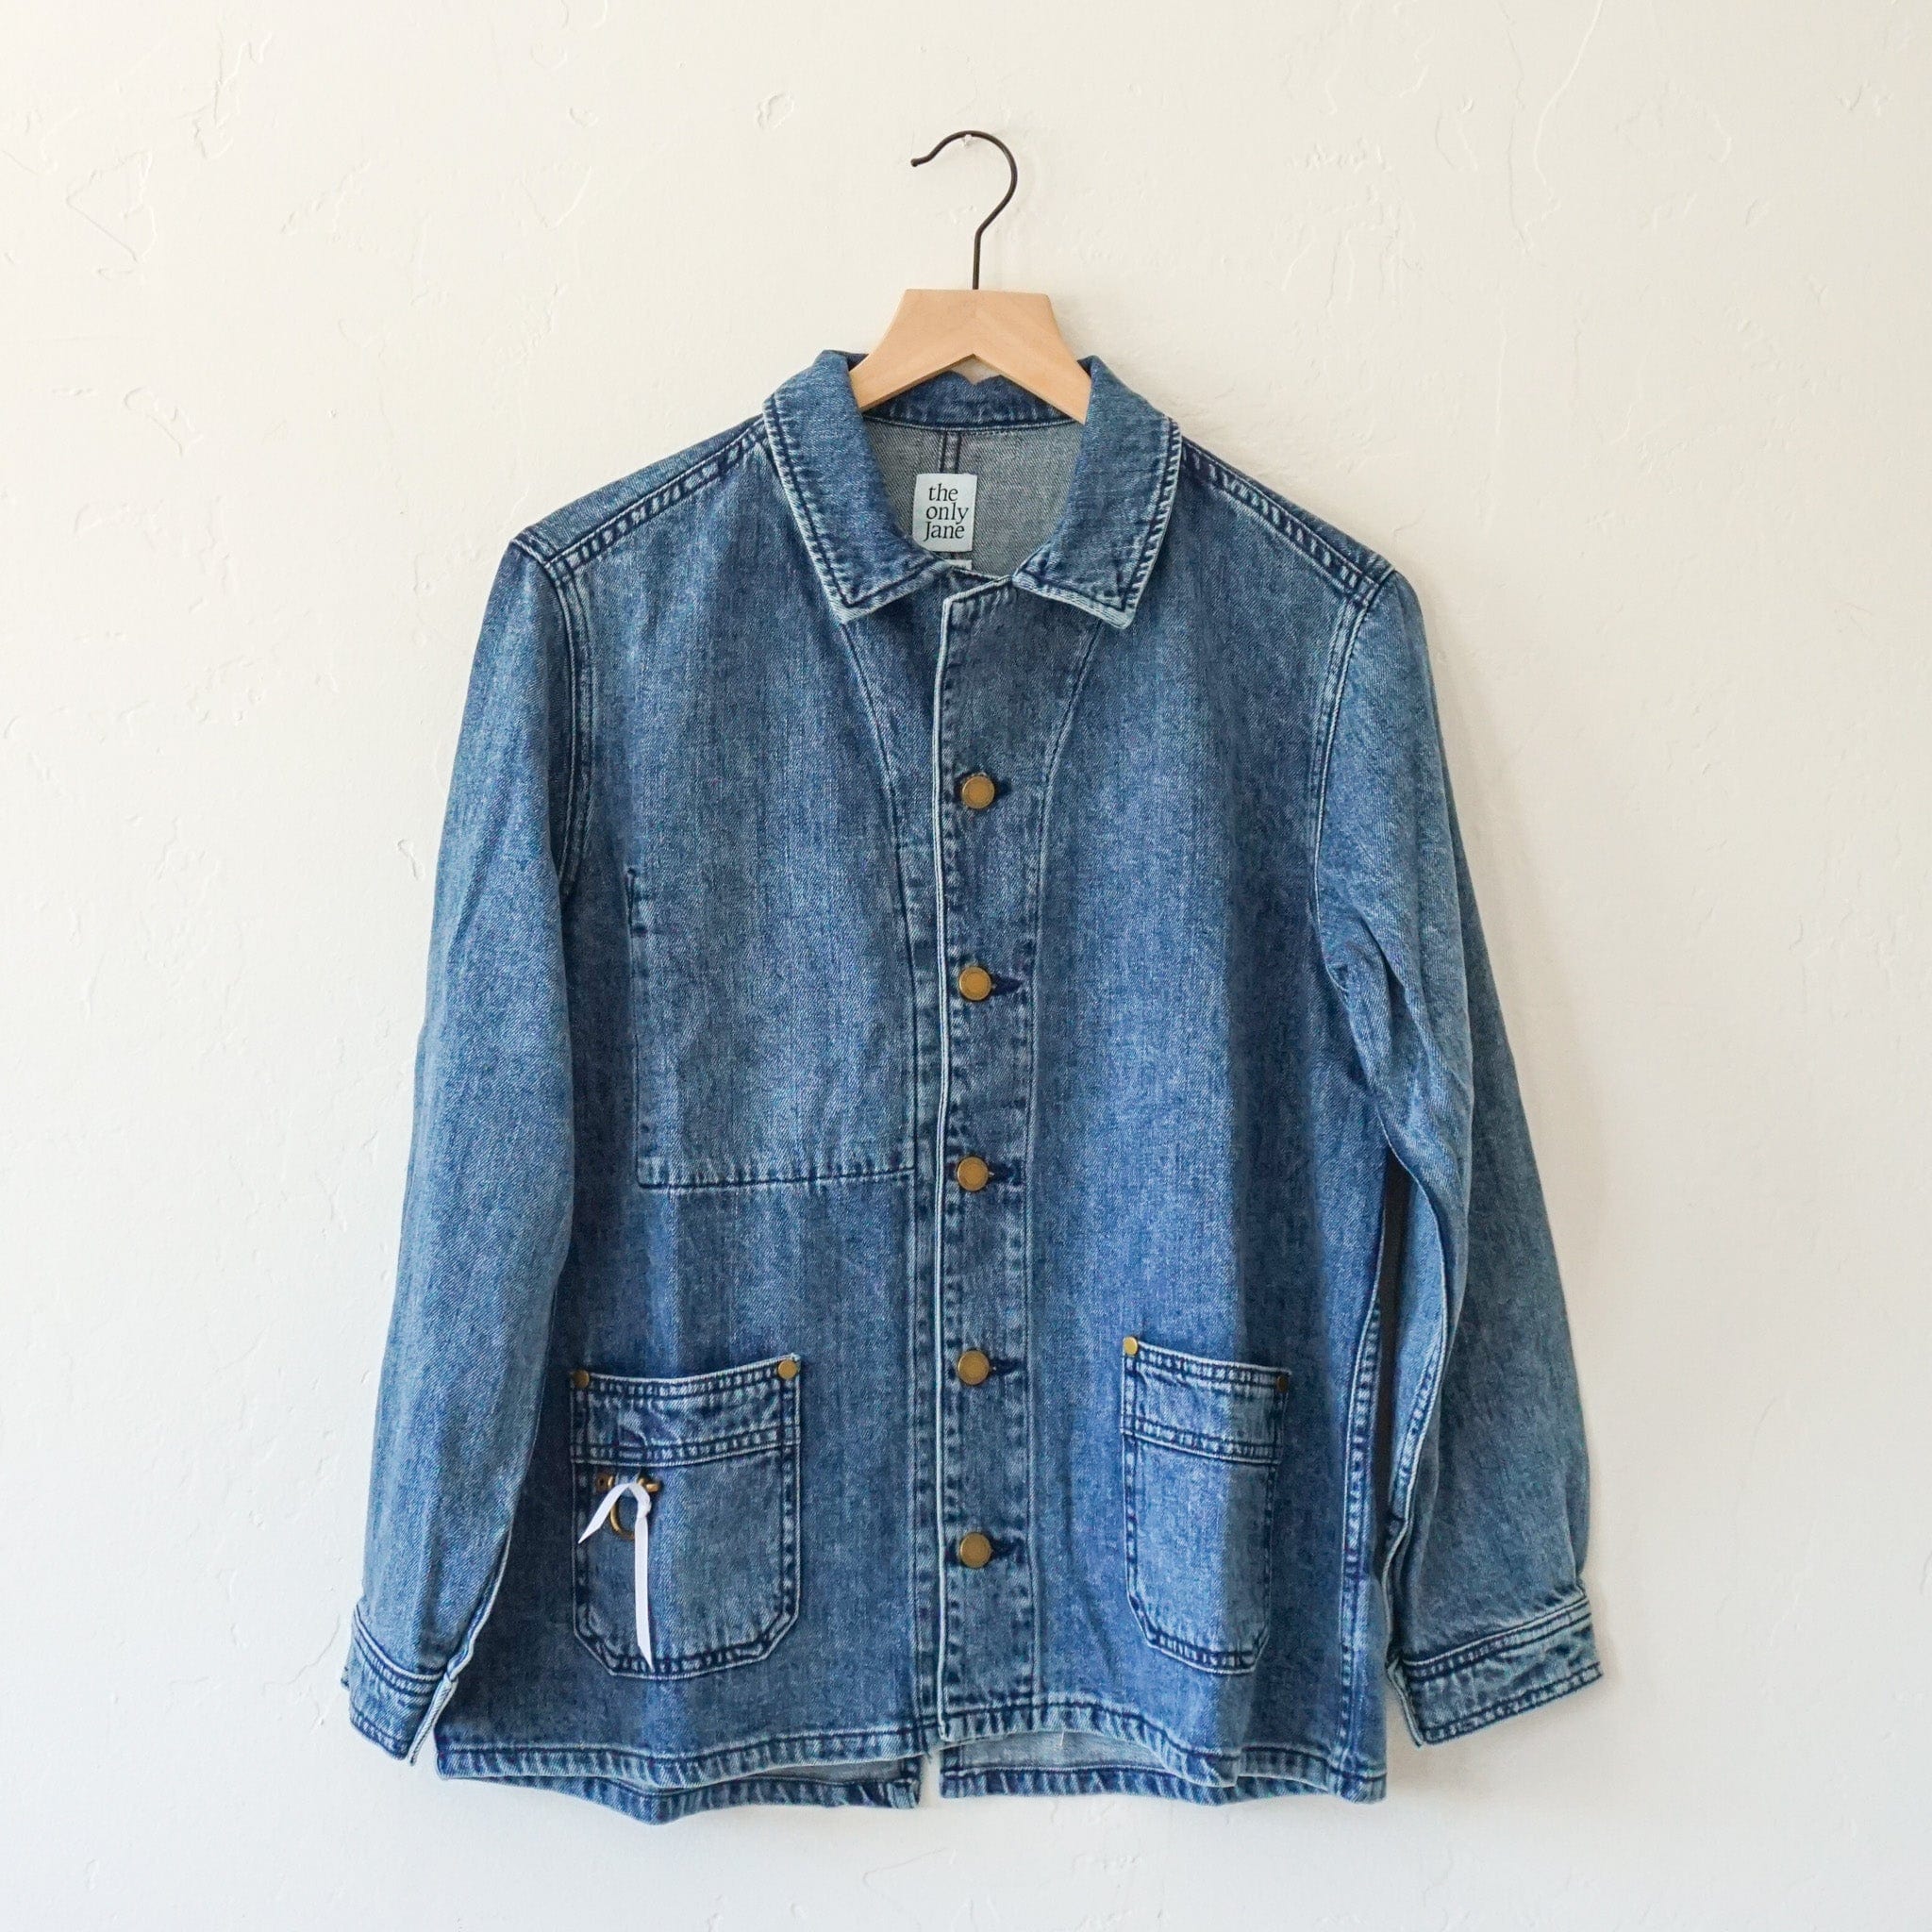 Only Jane Apparel & Accessories Washed Indigo / Extra Small The Only Jane Jacket